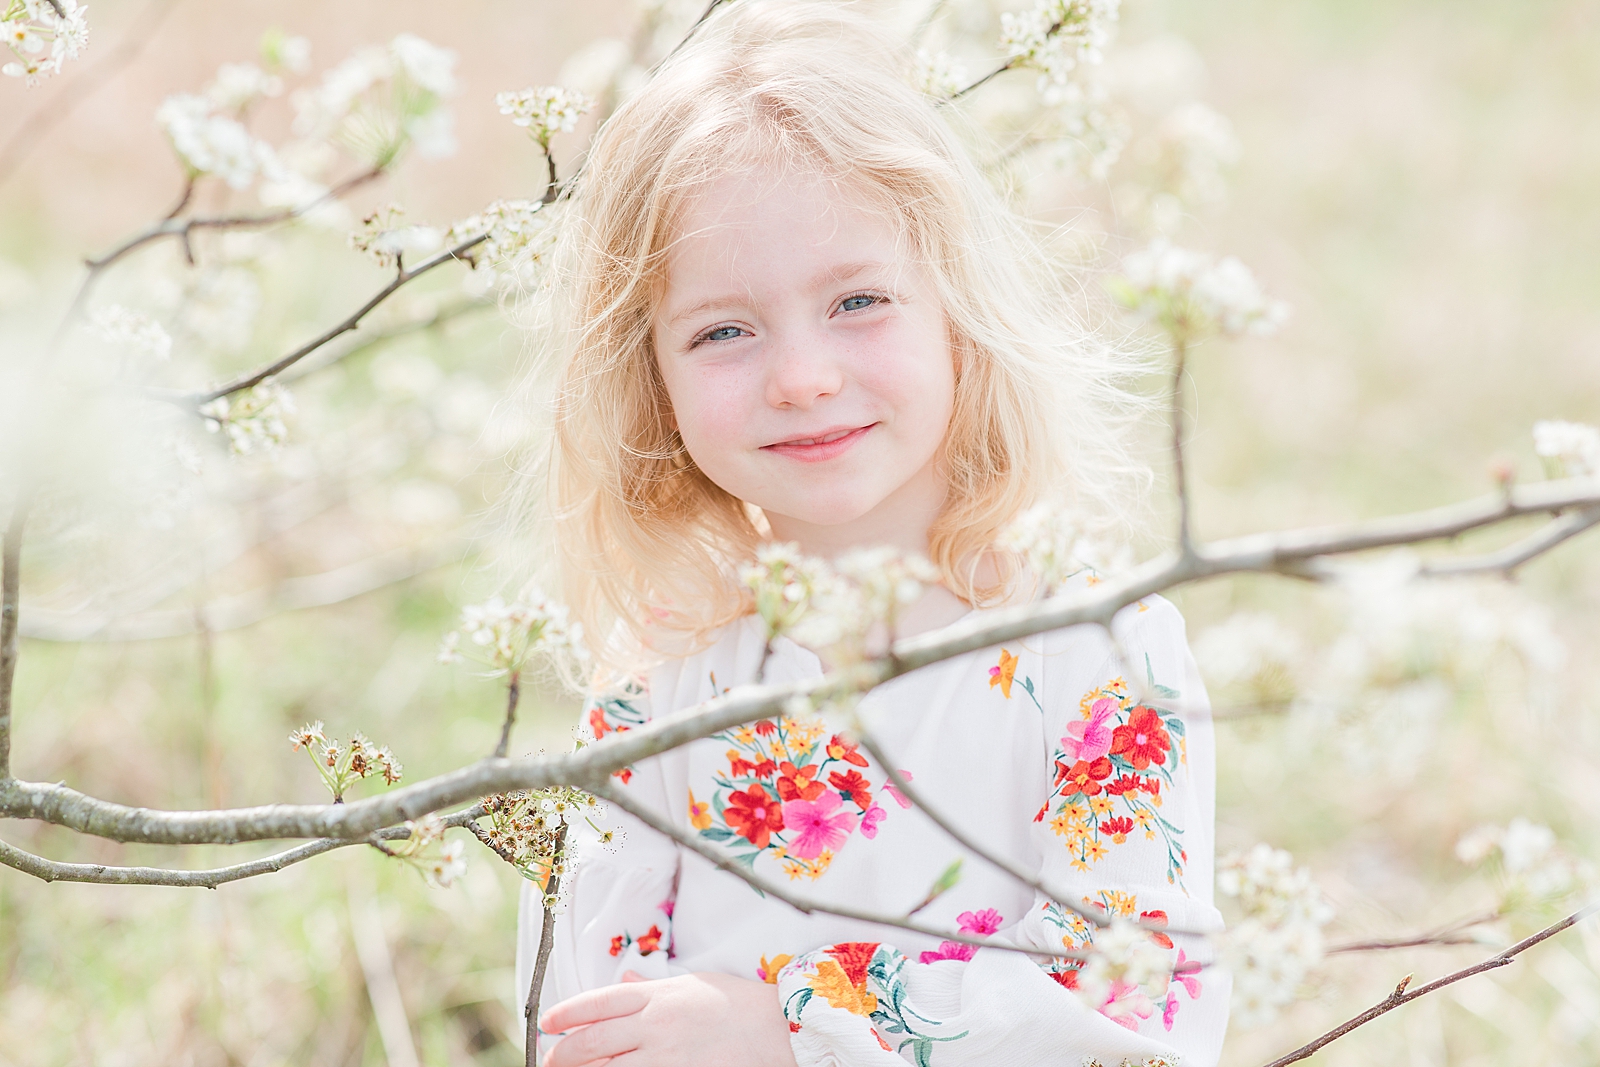 Asheville Photographer's Family blonde girl smiling at camera through trees Photo